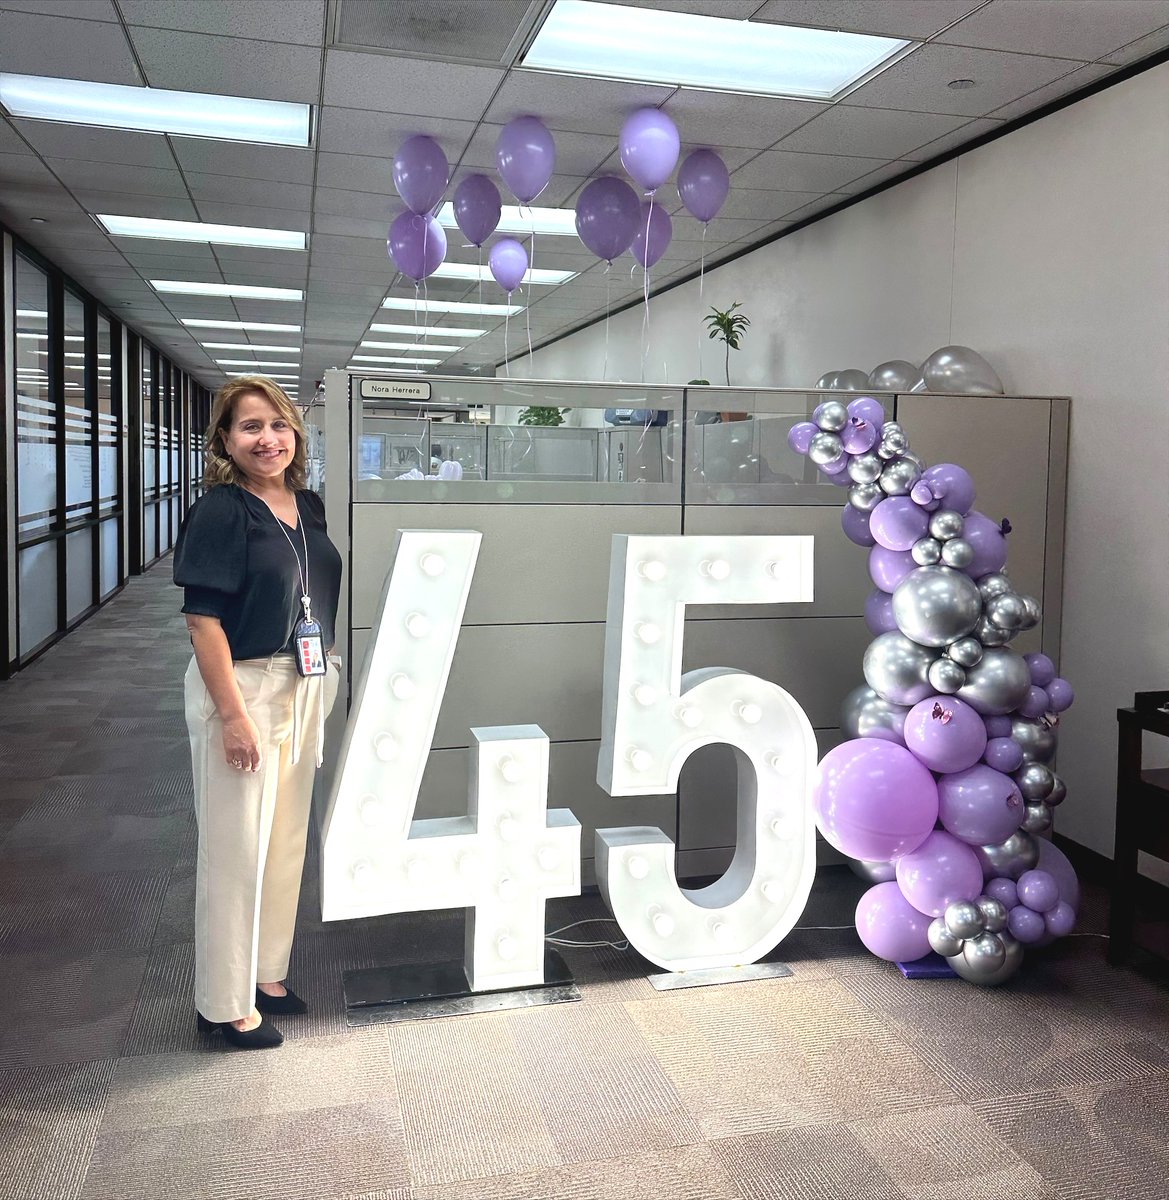 It’s not every day you get to celebrate an employee’s 45th work anniversary! 👏 Nora says, “Reflecting on 45 years at El Paso Electric fills me with gratitude for the countless connections made, challenges overcome, and memories cherished.' Like this post to congratulate Nora! 💜